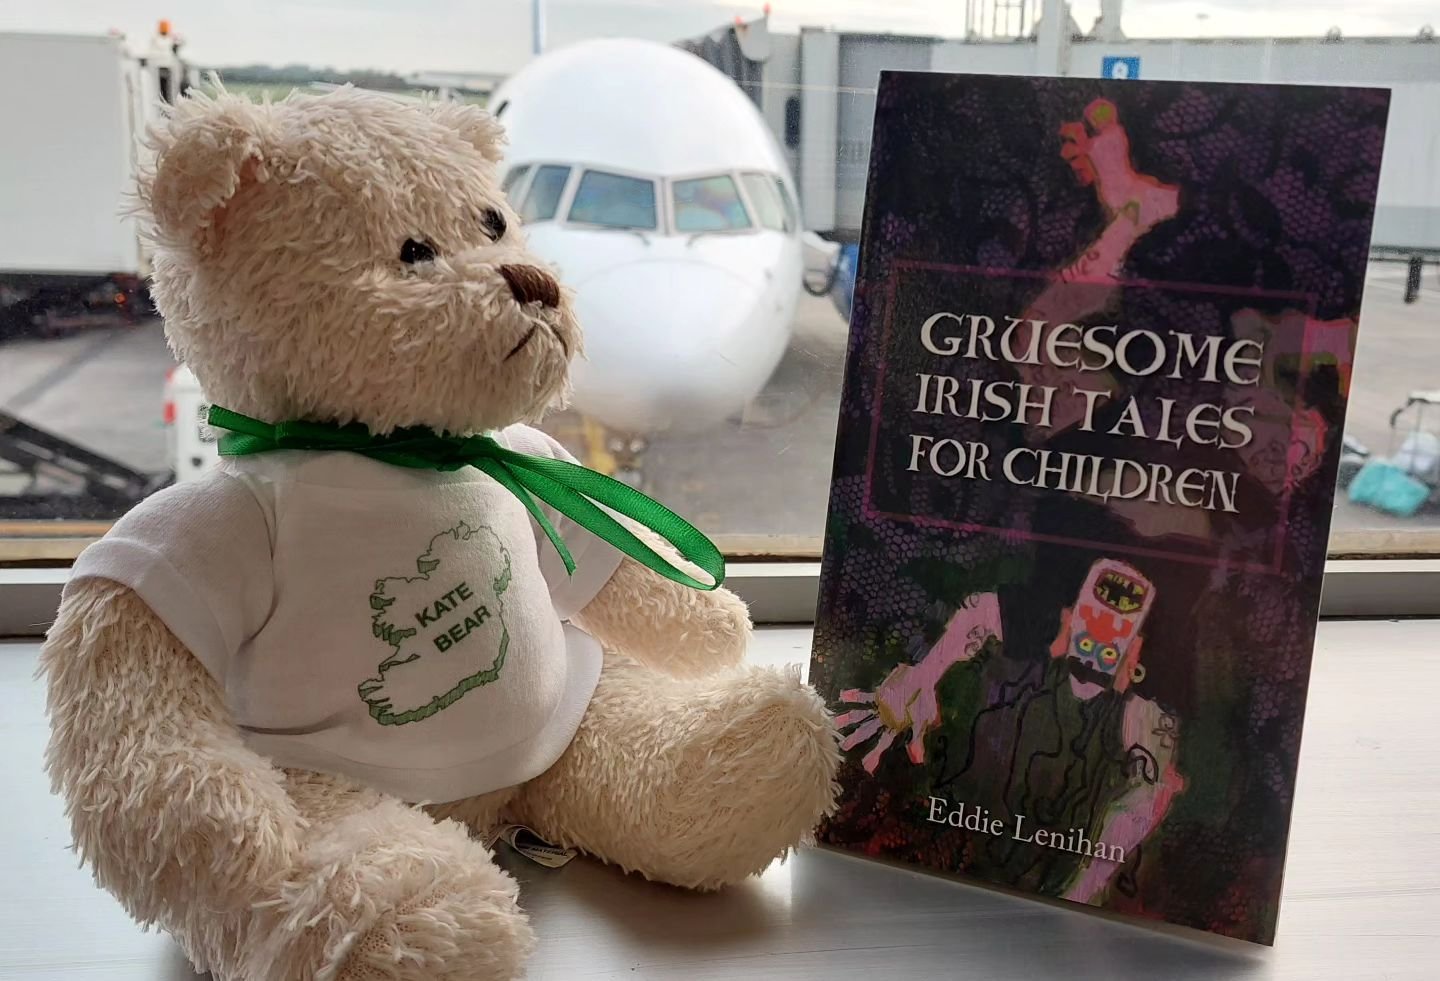 Kate Bear is getting her story straight at the gate 😁

Reading Gruesome Irish Tales for Children (and Teddy Bears) by master seancha&iacute; @eddie_lenihan_official

Let's share stories at @cgpirishfest in @chicagogaelicpark
💚

#whatsyourstory